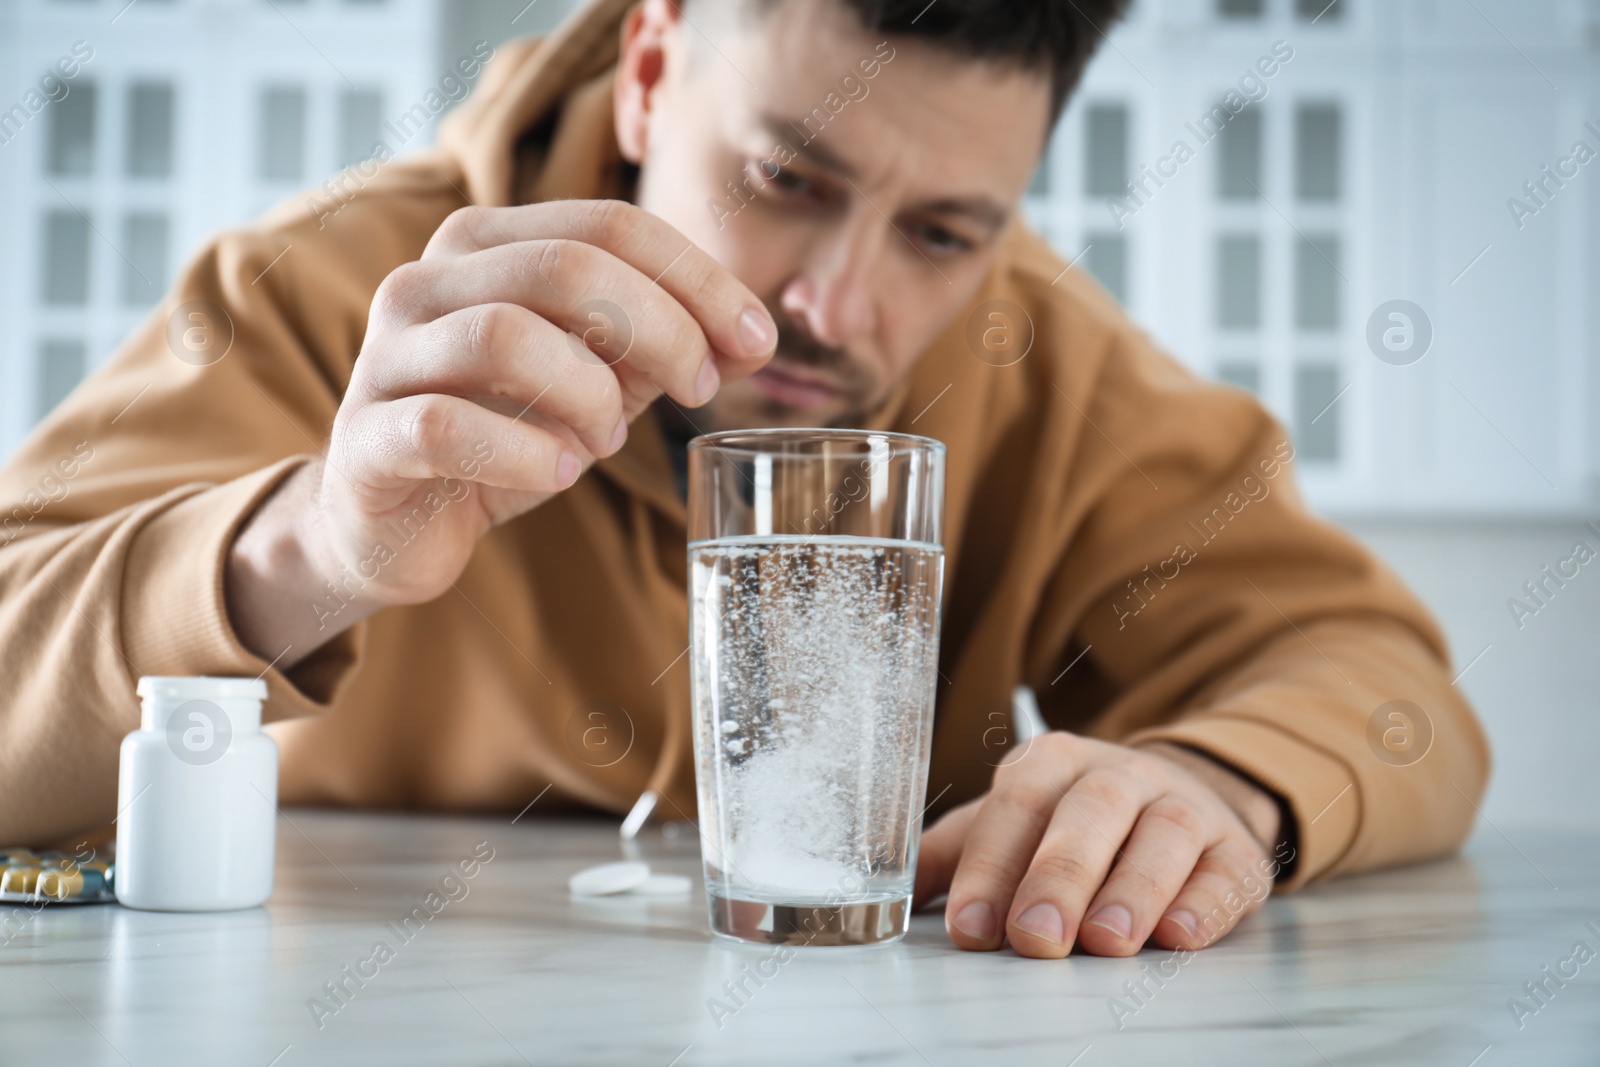 Photo of Man taking medicine for hangover at table in kitchen